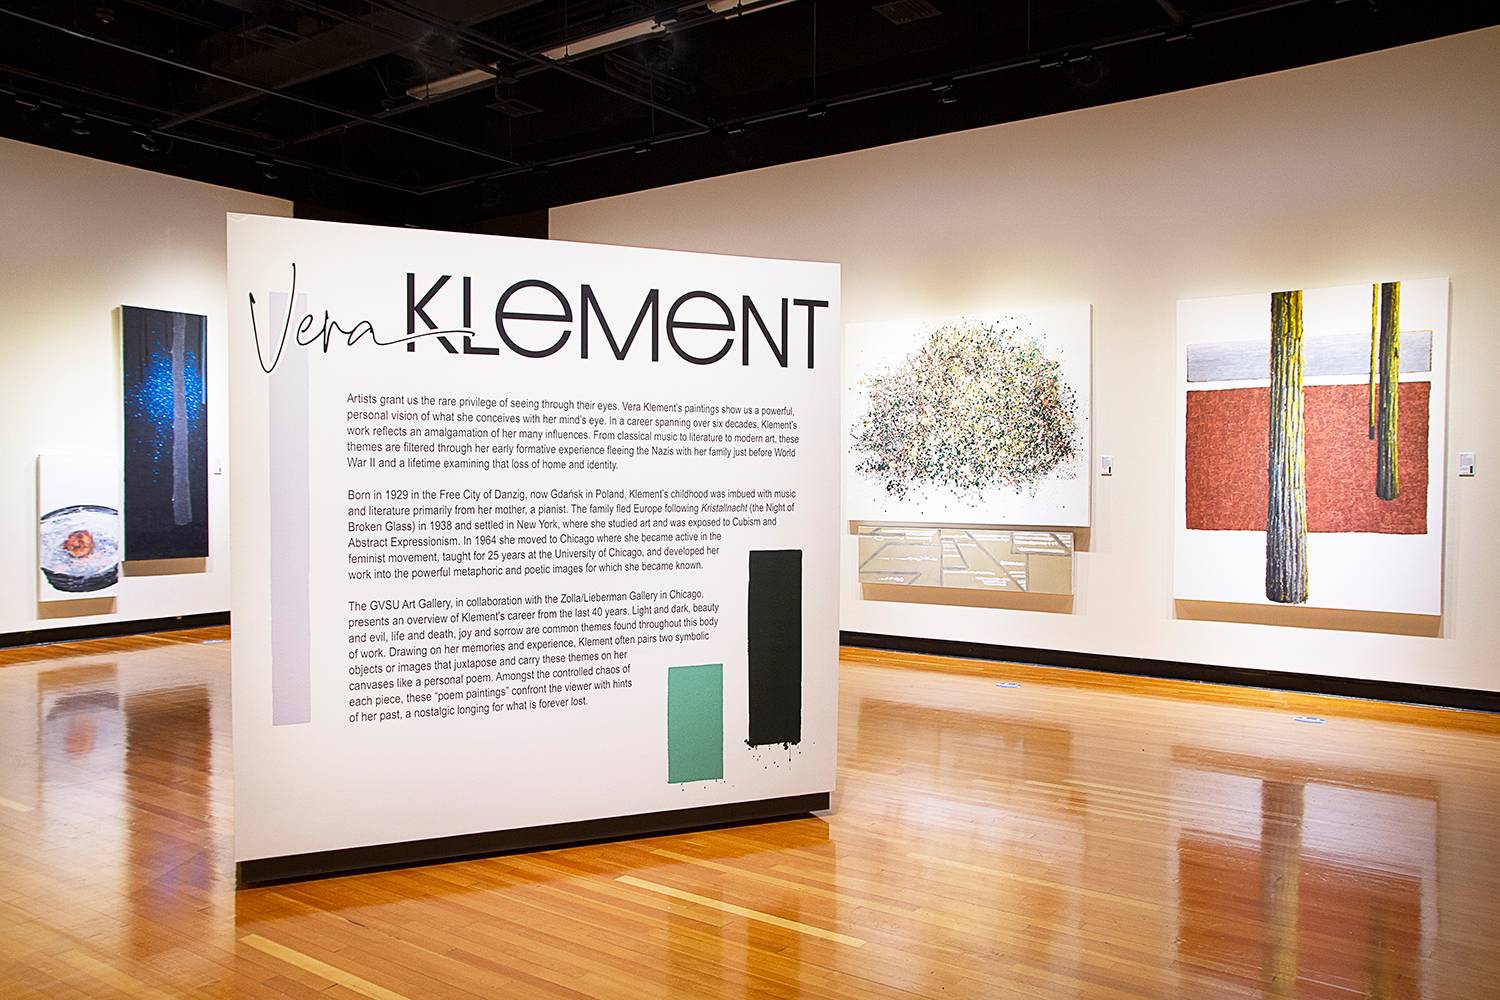 View of the GVSU Art Gallery displaying the exhibition 'Vera Klement'